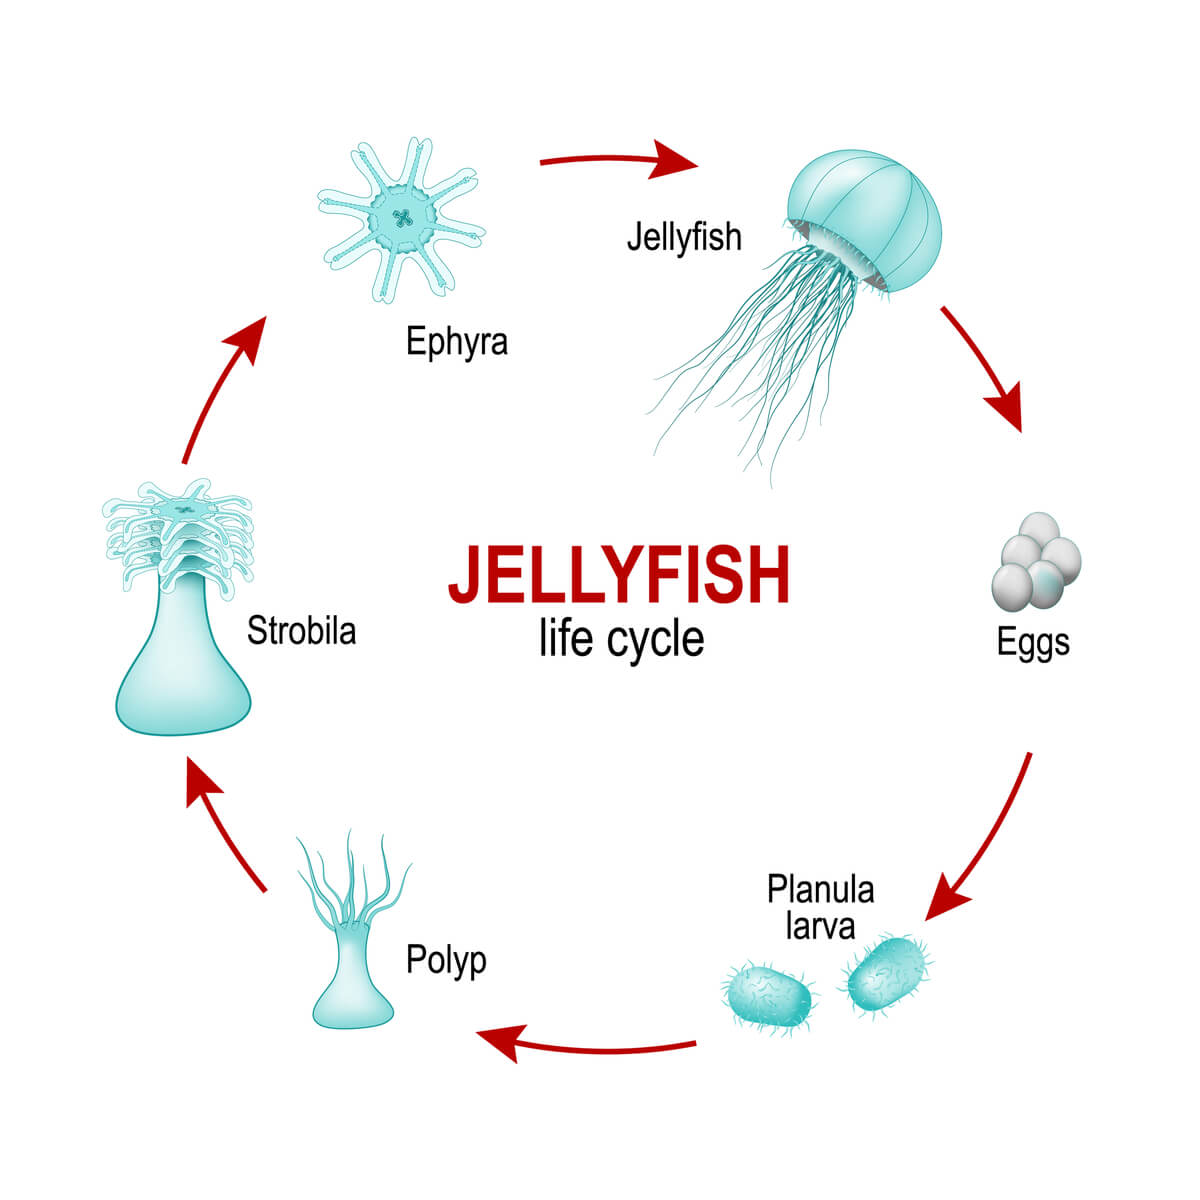 The typical life cycle of jellyfish.